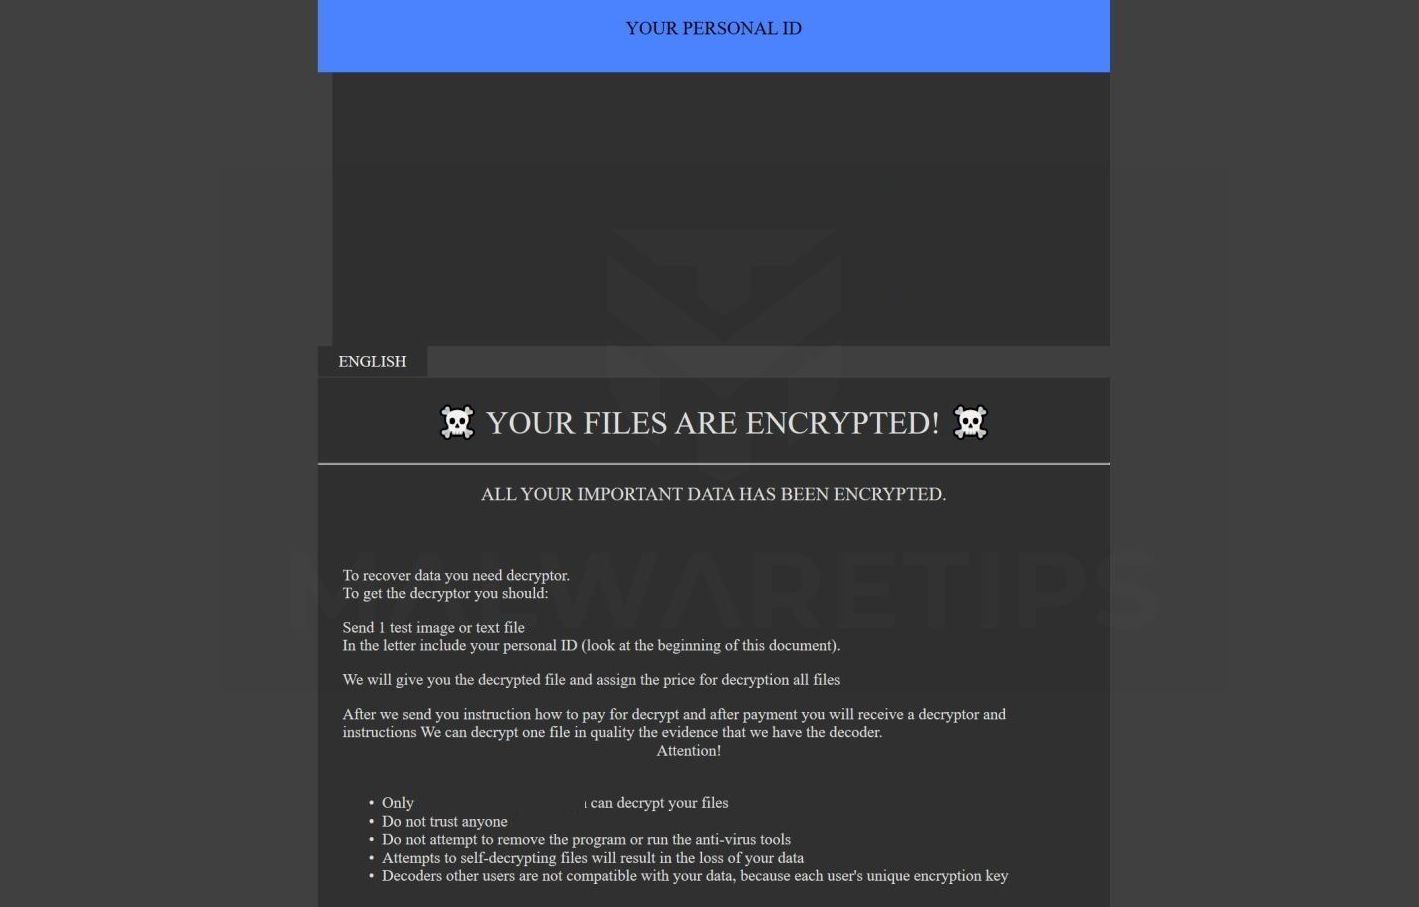 all files are encrypted